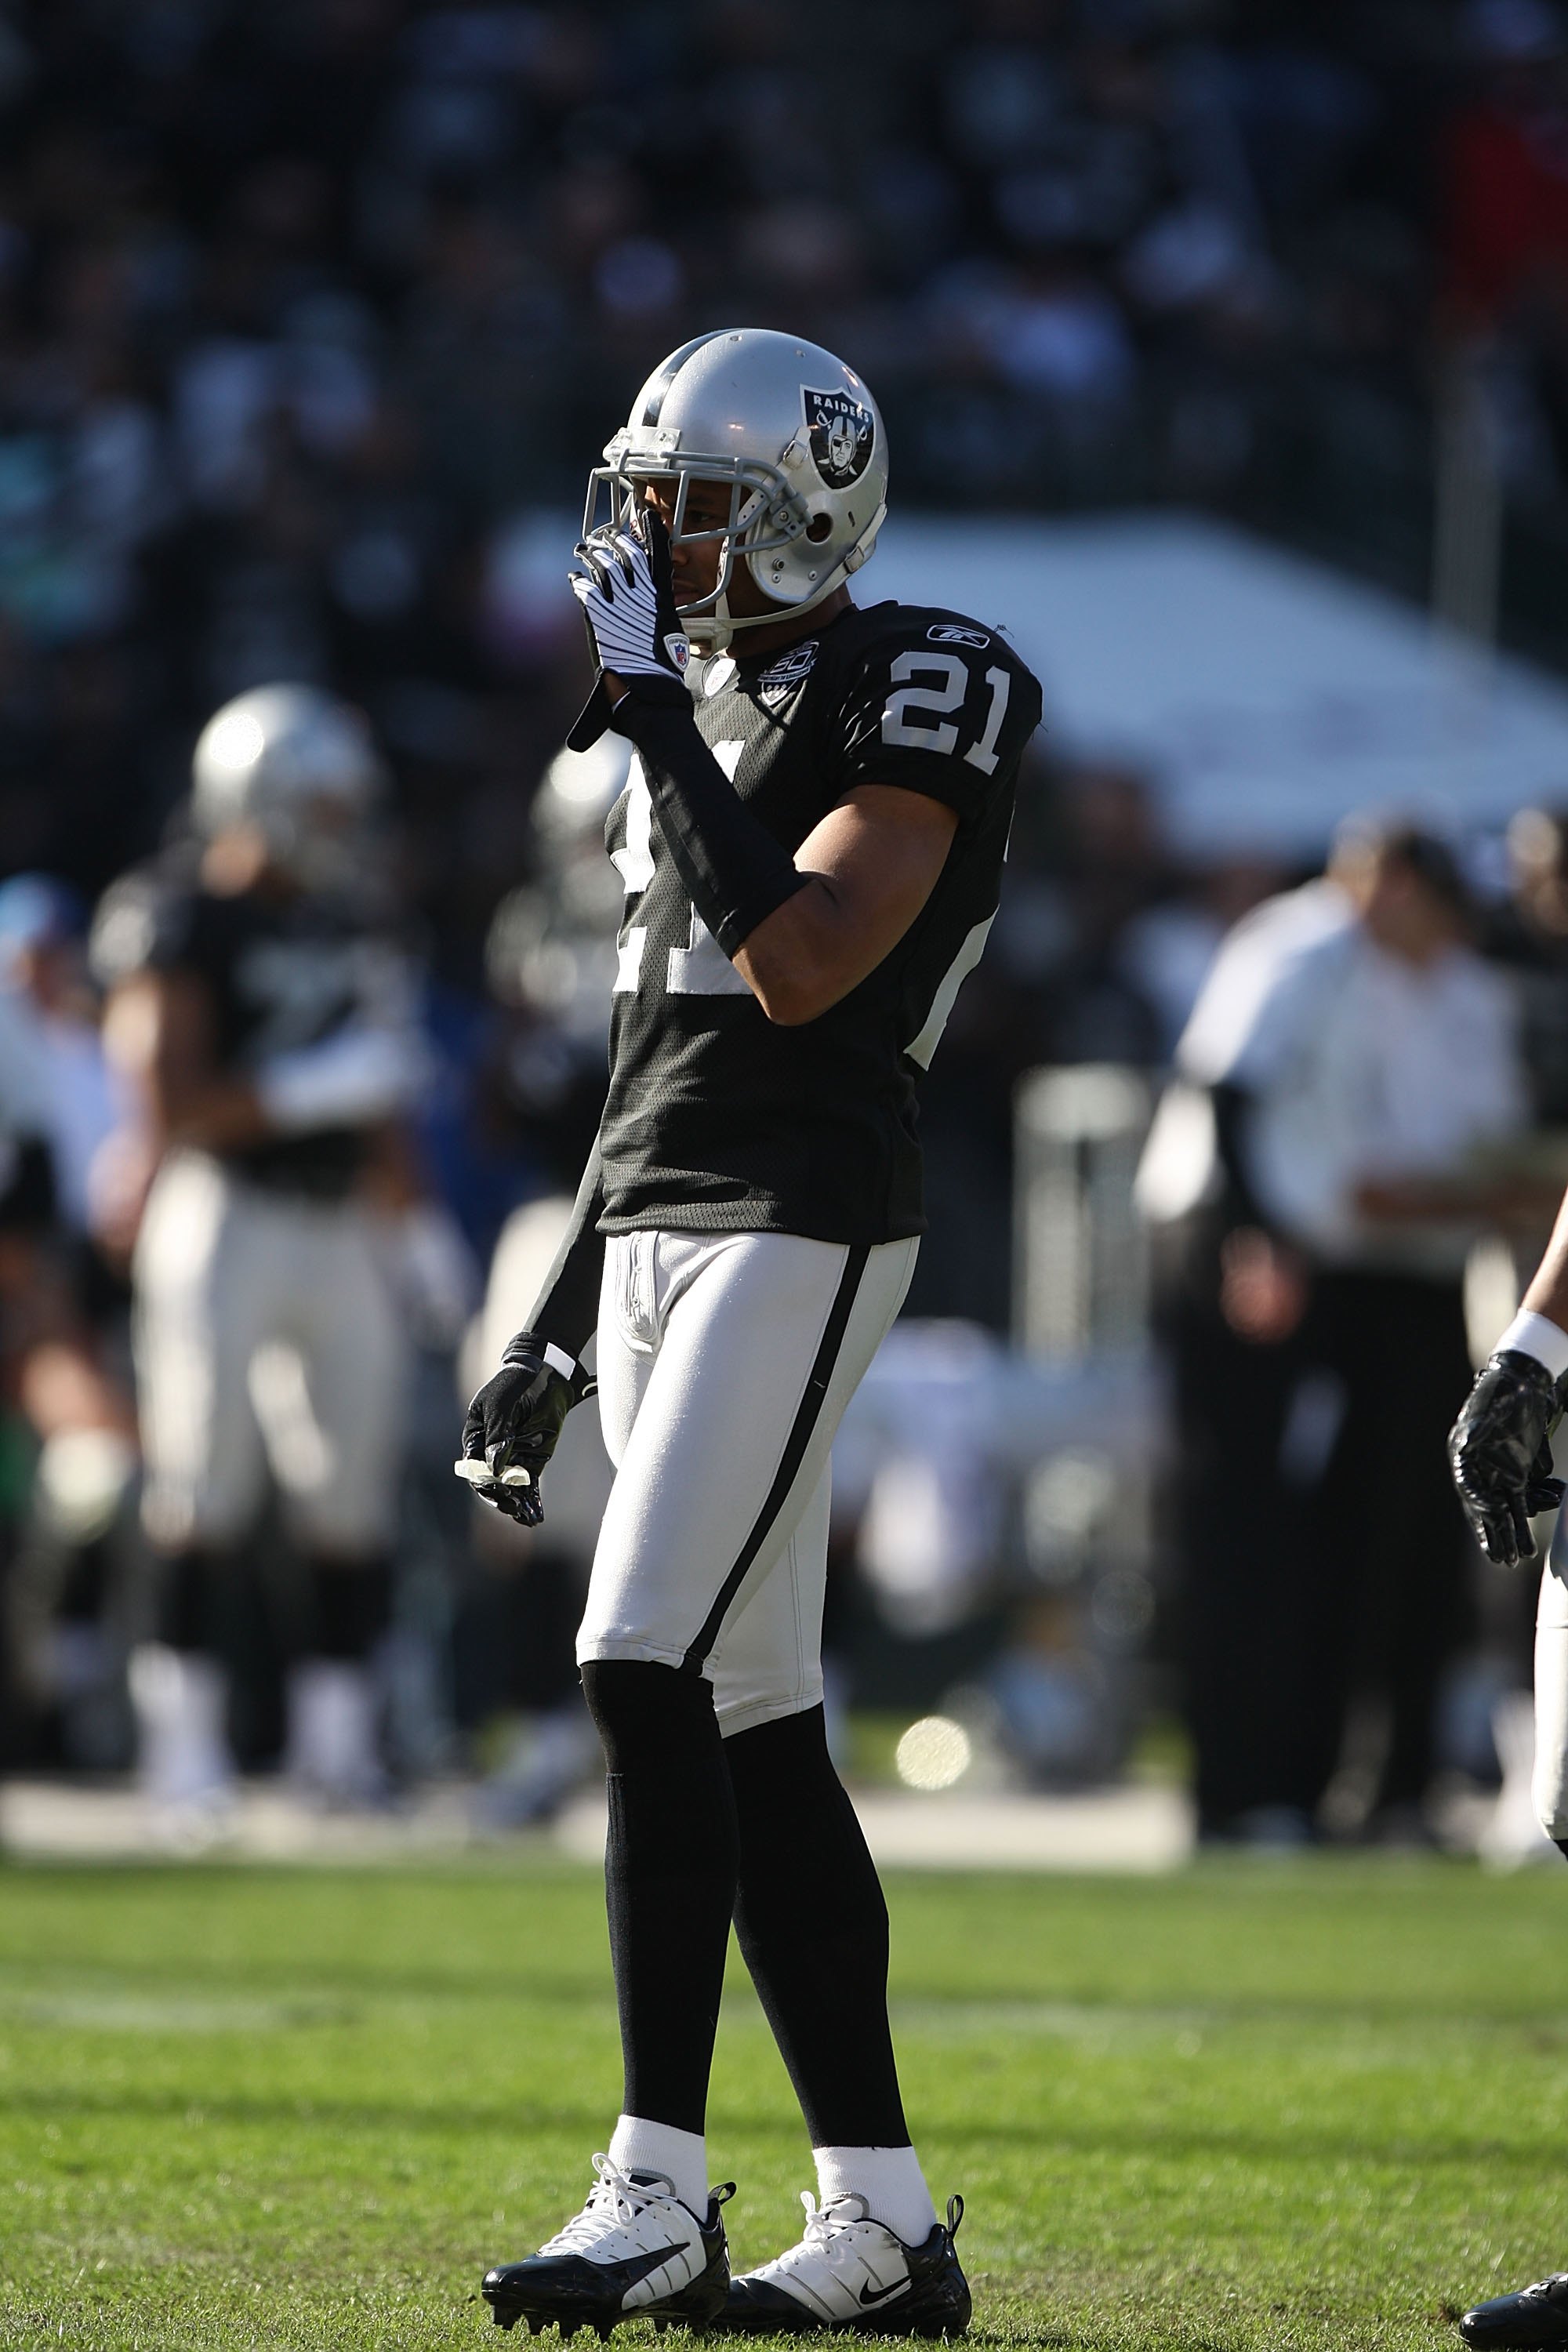 OAKLAND, CA - JANUARY 03:  Nnamdi Asomugha #21 of the Oakland Raiders in action against the Baltimore Ravens during an NFL game at Oakland-Alameda County Coliseum on January 3, 2010 in Oakland, California.  (Photo by Jed Jacobsohn/Getty Images)